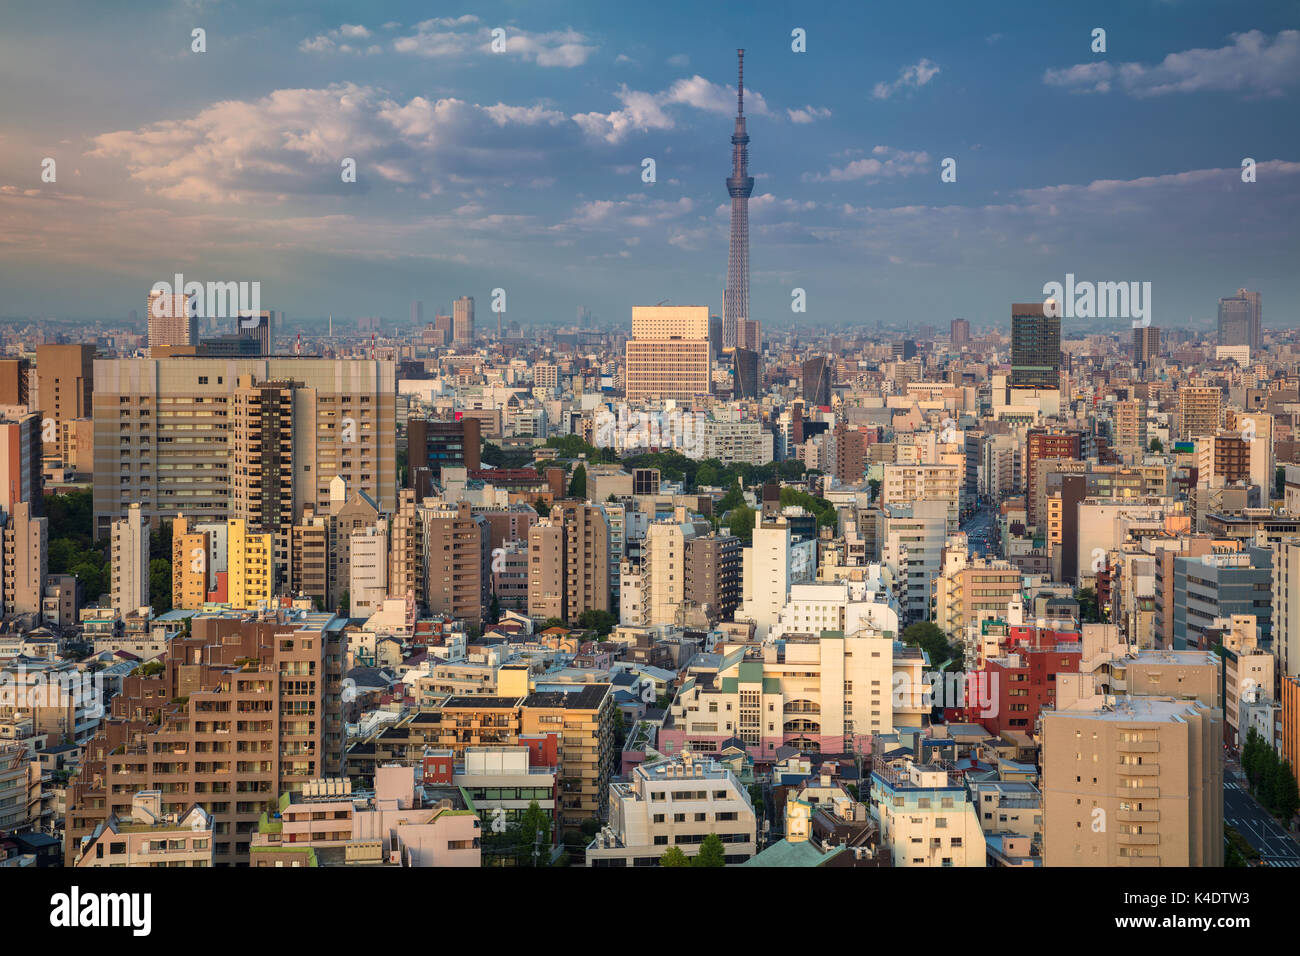 Tokyo. Cityscape image of Tokyo skyline during sunset in Japan. Stock Photo